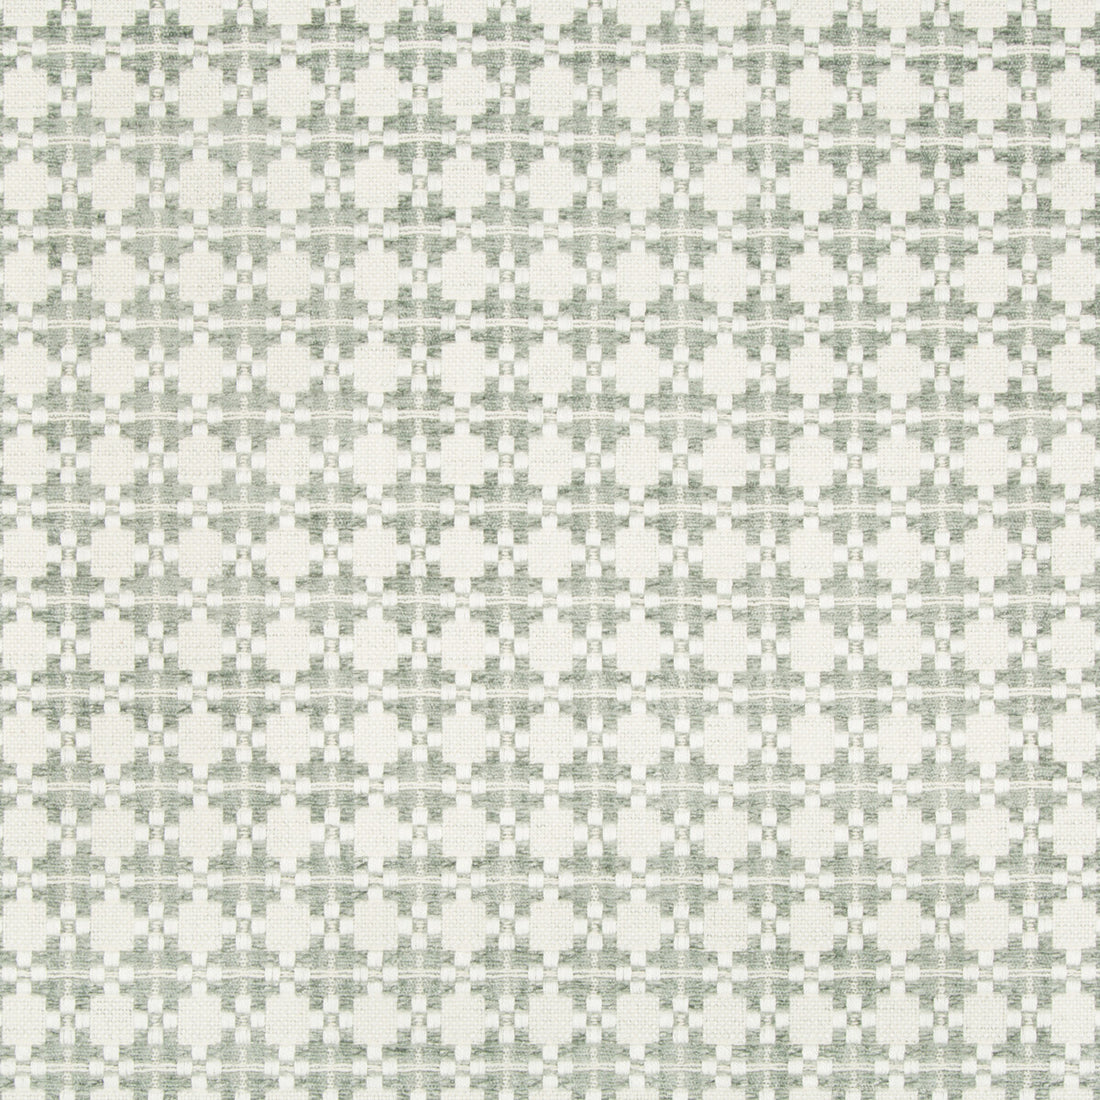 Back In Style fabric in mineral color - pattern 34962.23.0 - by Kravet Couture in the Modern Tailor collection